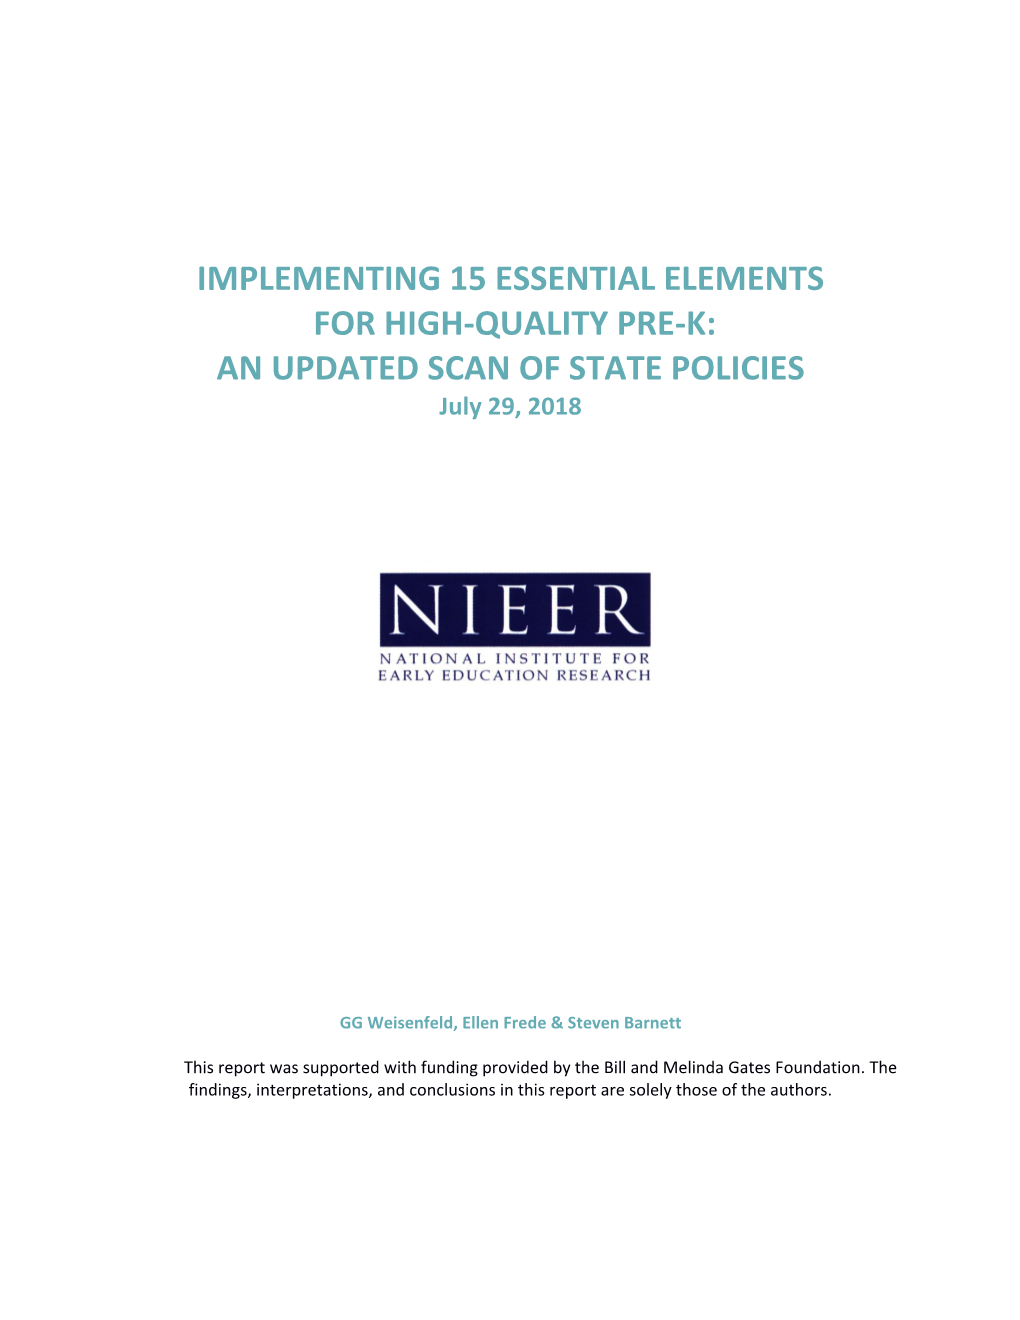 IMPLEMENTING 15 ESSENTIAL ELEMENTS for HIGH-QUALITY PRE-K: an UPDATED SCAN of STATE POLICIES July 29, 2018